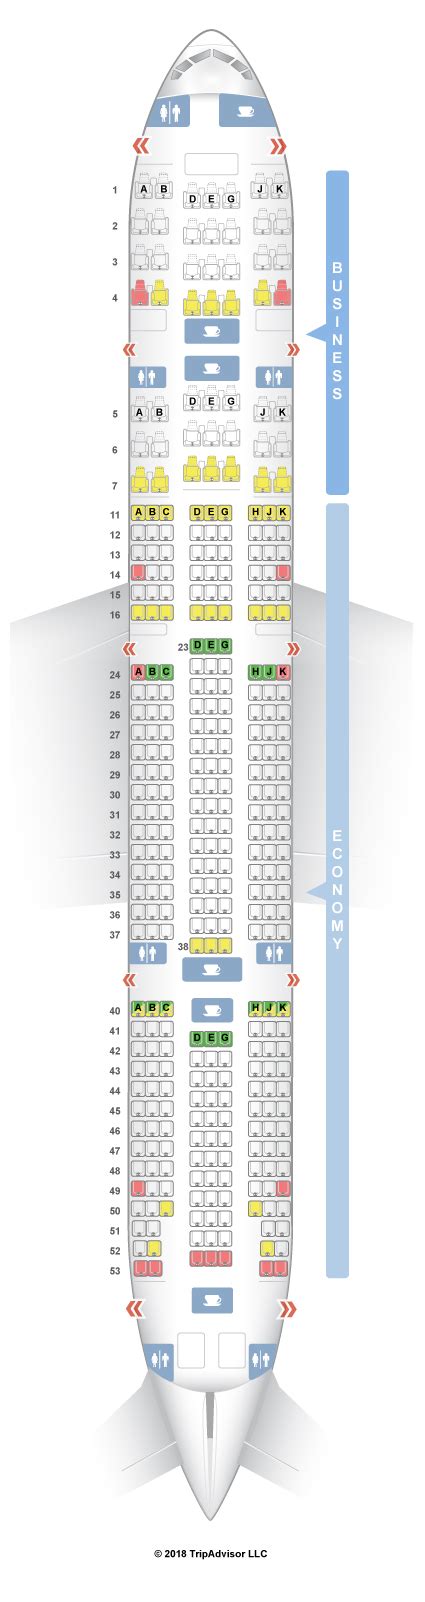 Turkish Airlines Seating Chart